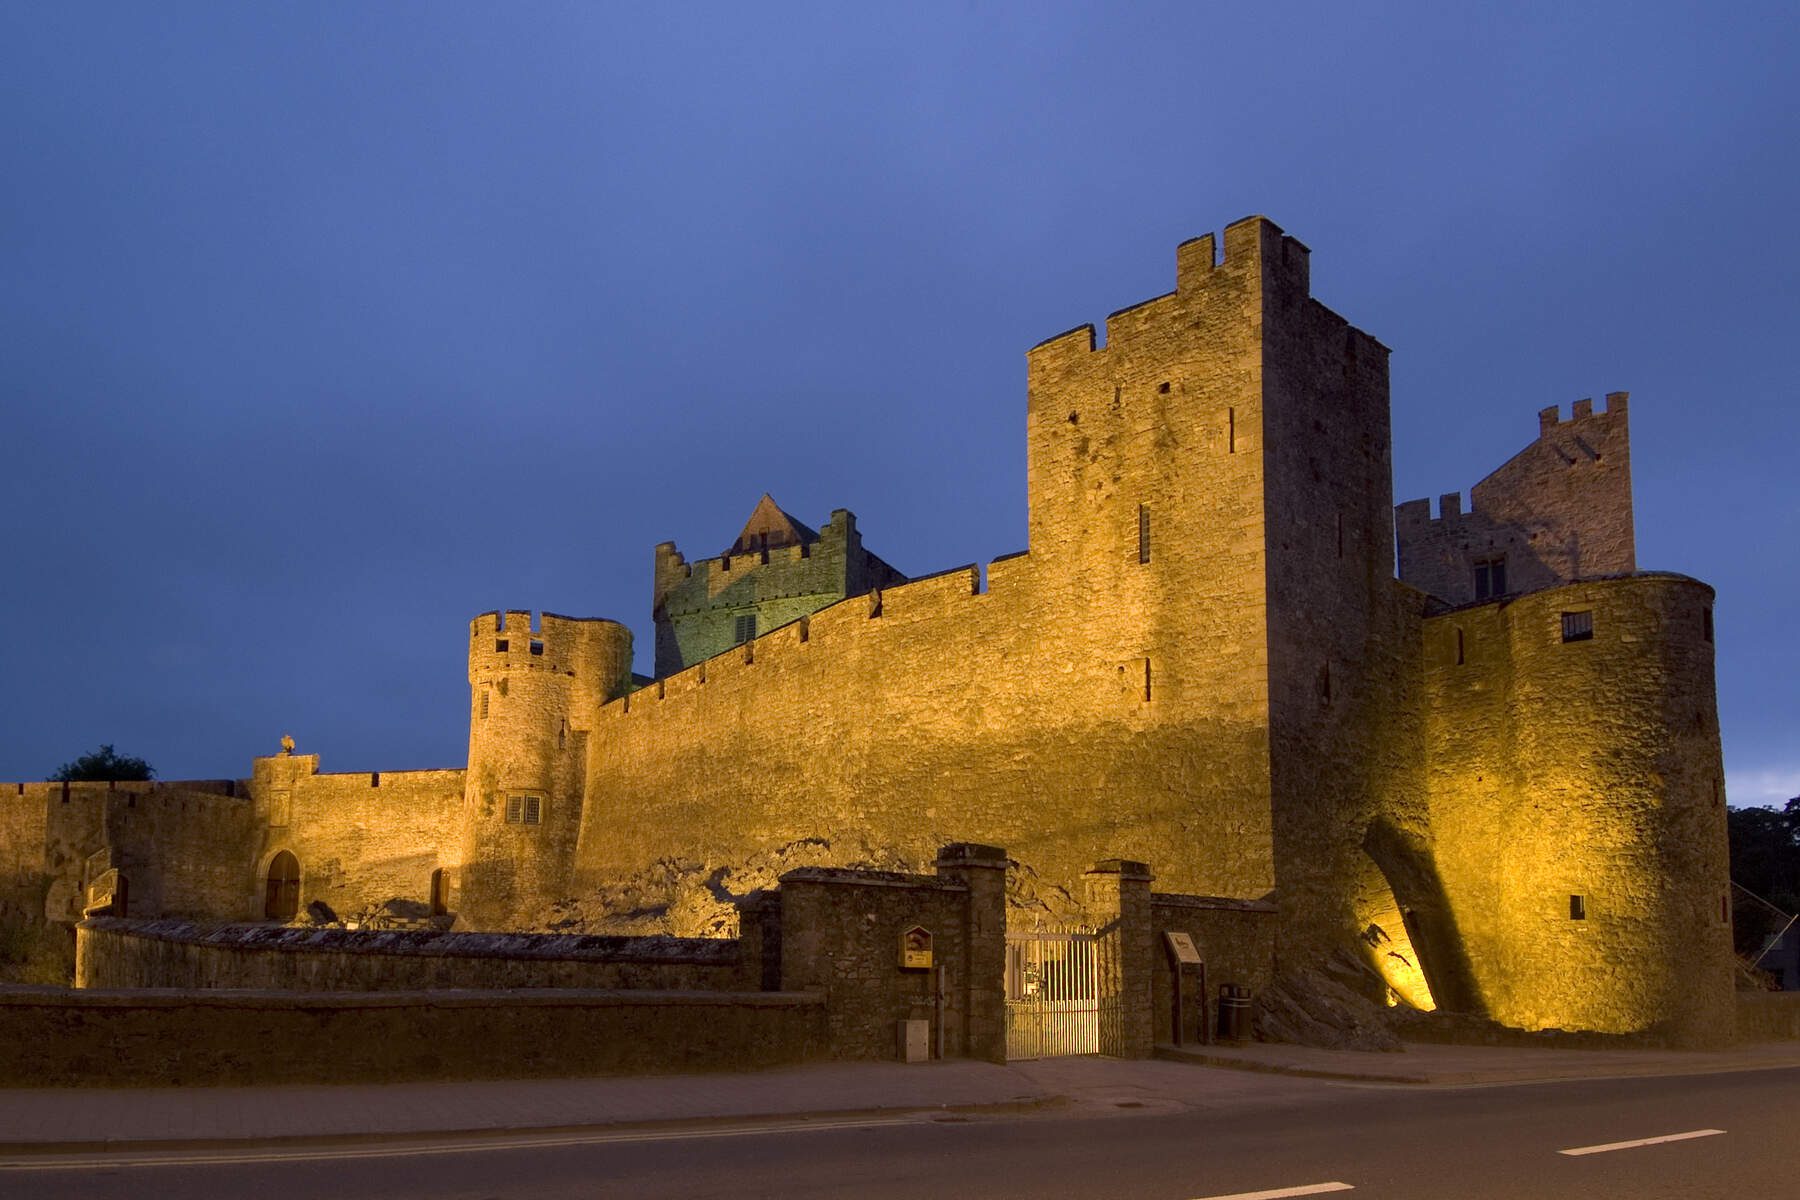 A long shot of the Cahir Castle with lighting